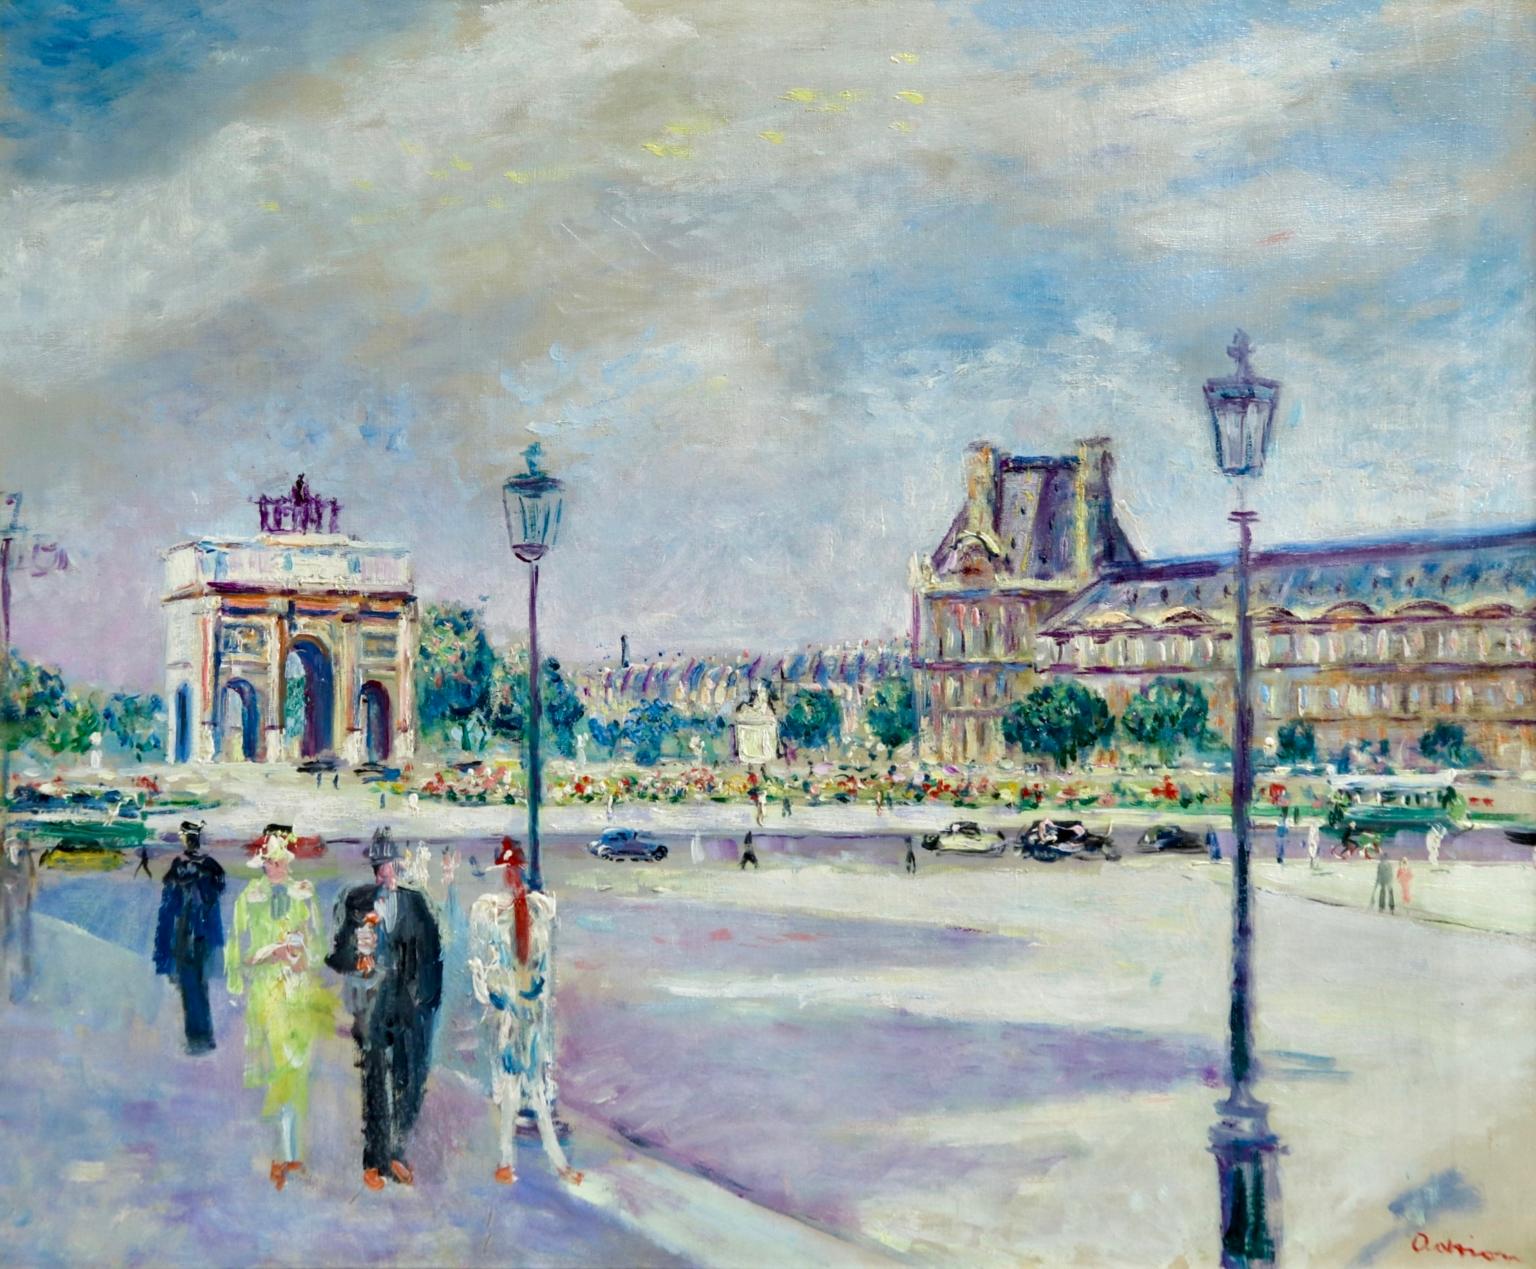 Lucien Adrion Figurative Painting - Carrousel du Louvre - Post Impressionist Oil, Figures in Cityscape by L Adrion